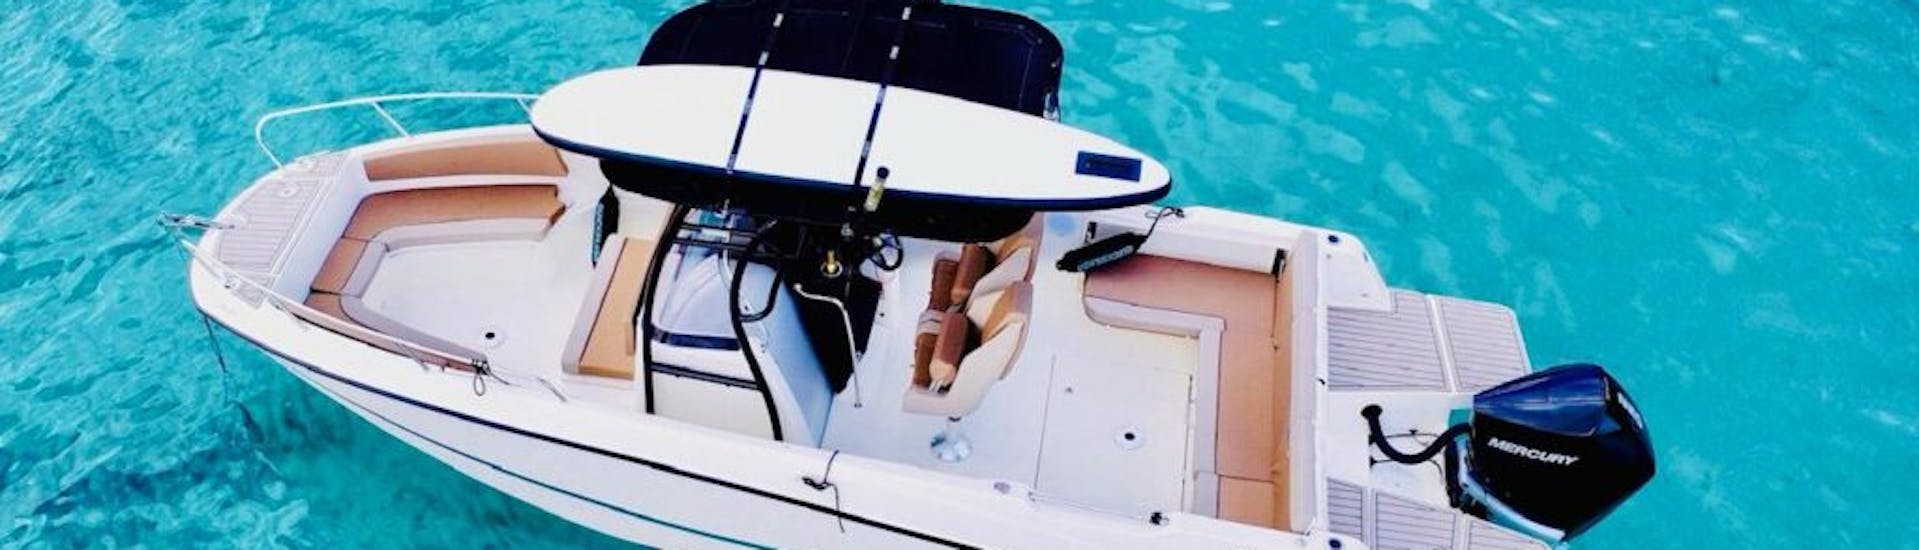 Top view of private boat within the clear waters of Mallorca with MiniBar&co